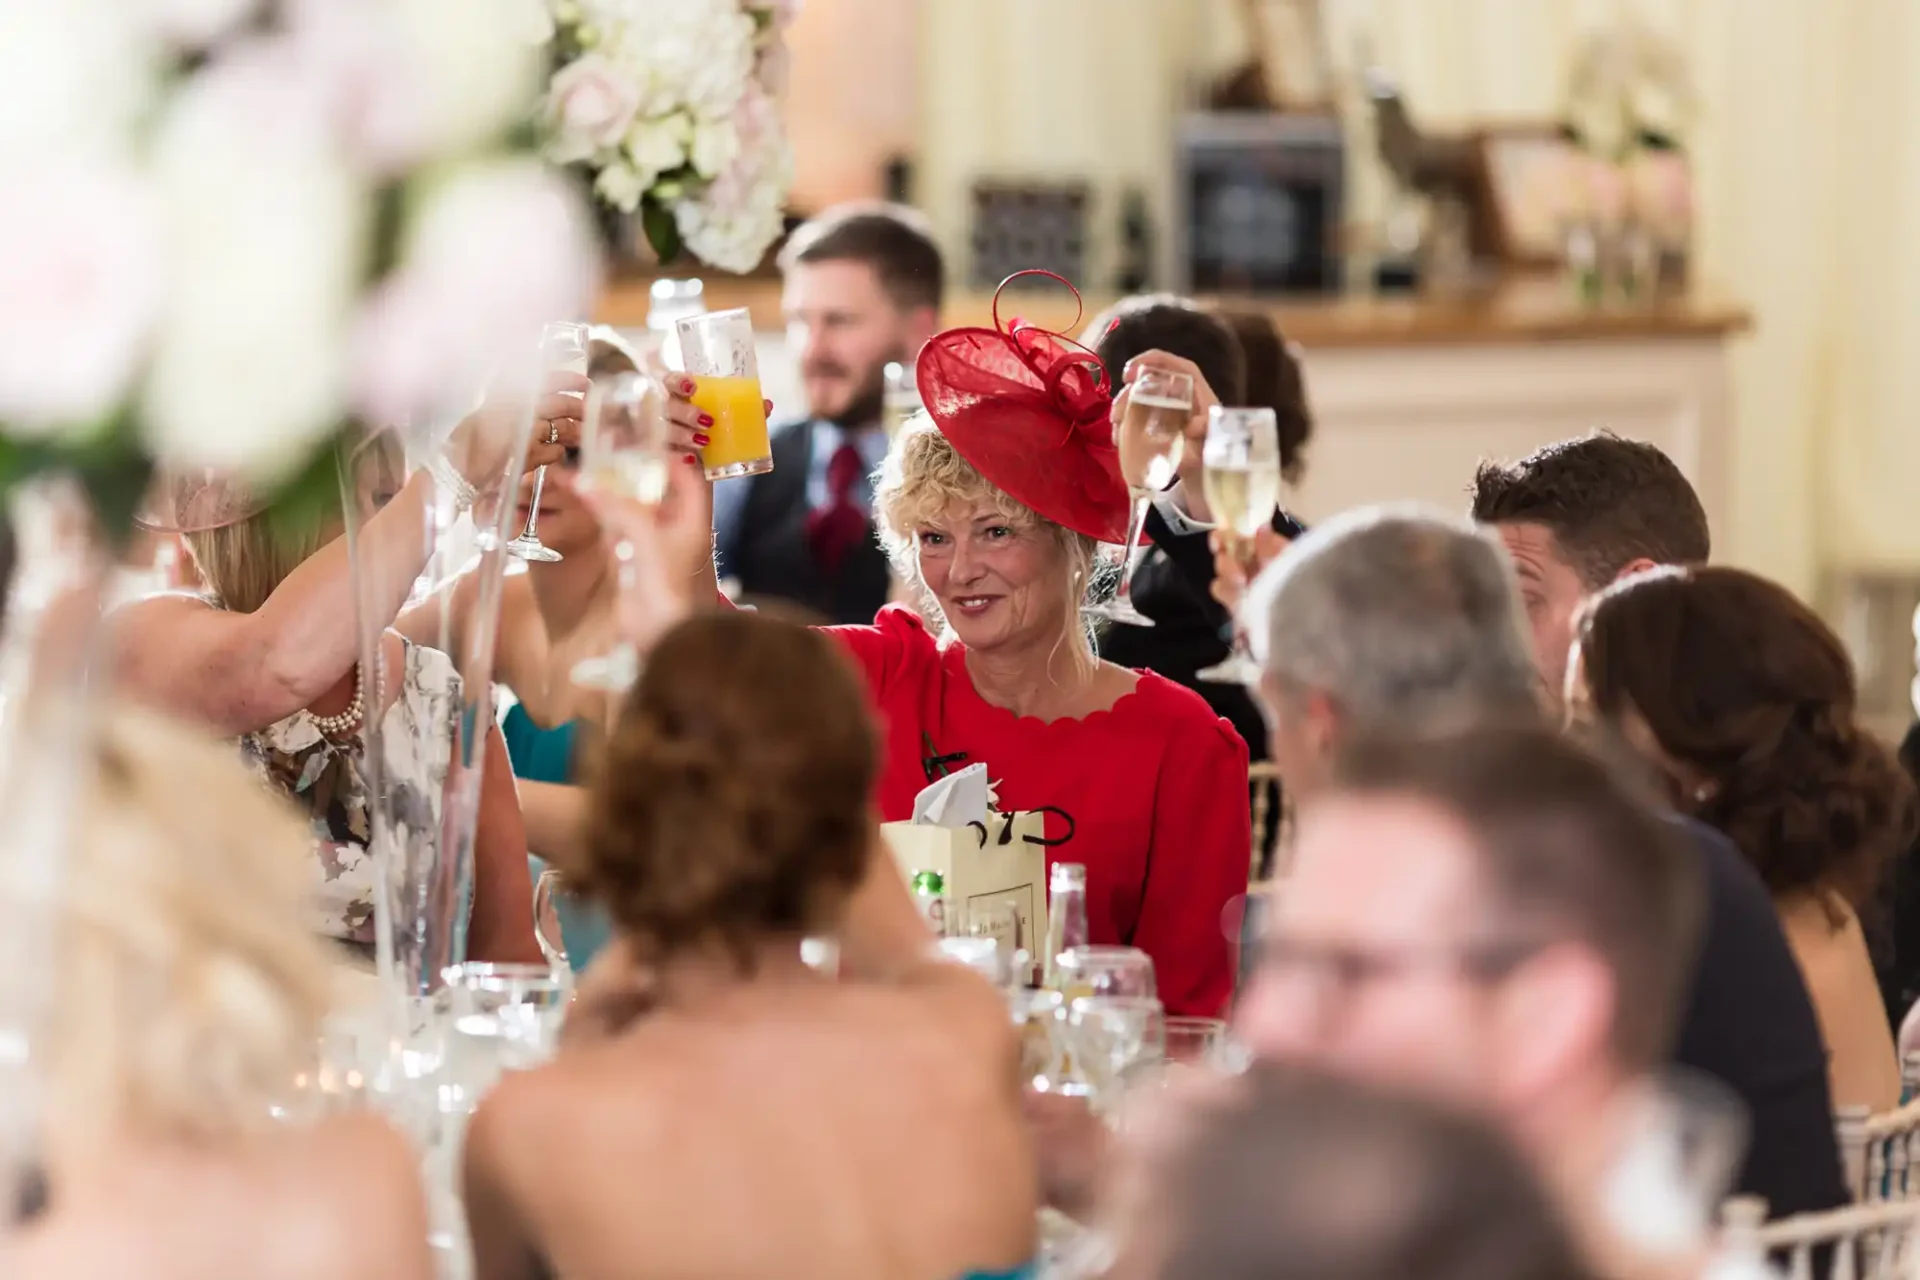 A woman in a red outfit and fascinator toasting with a drink at a crowded wedding reception.